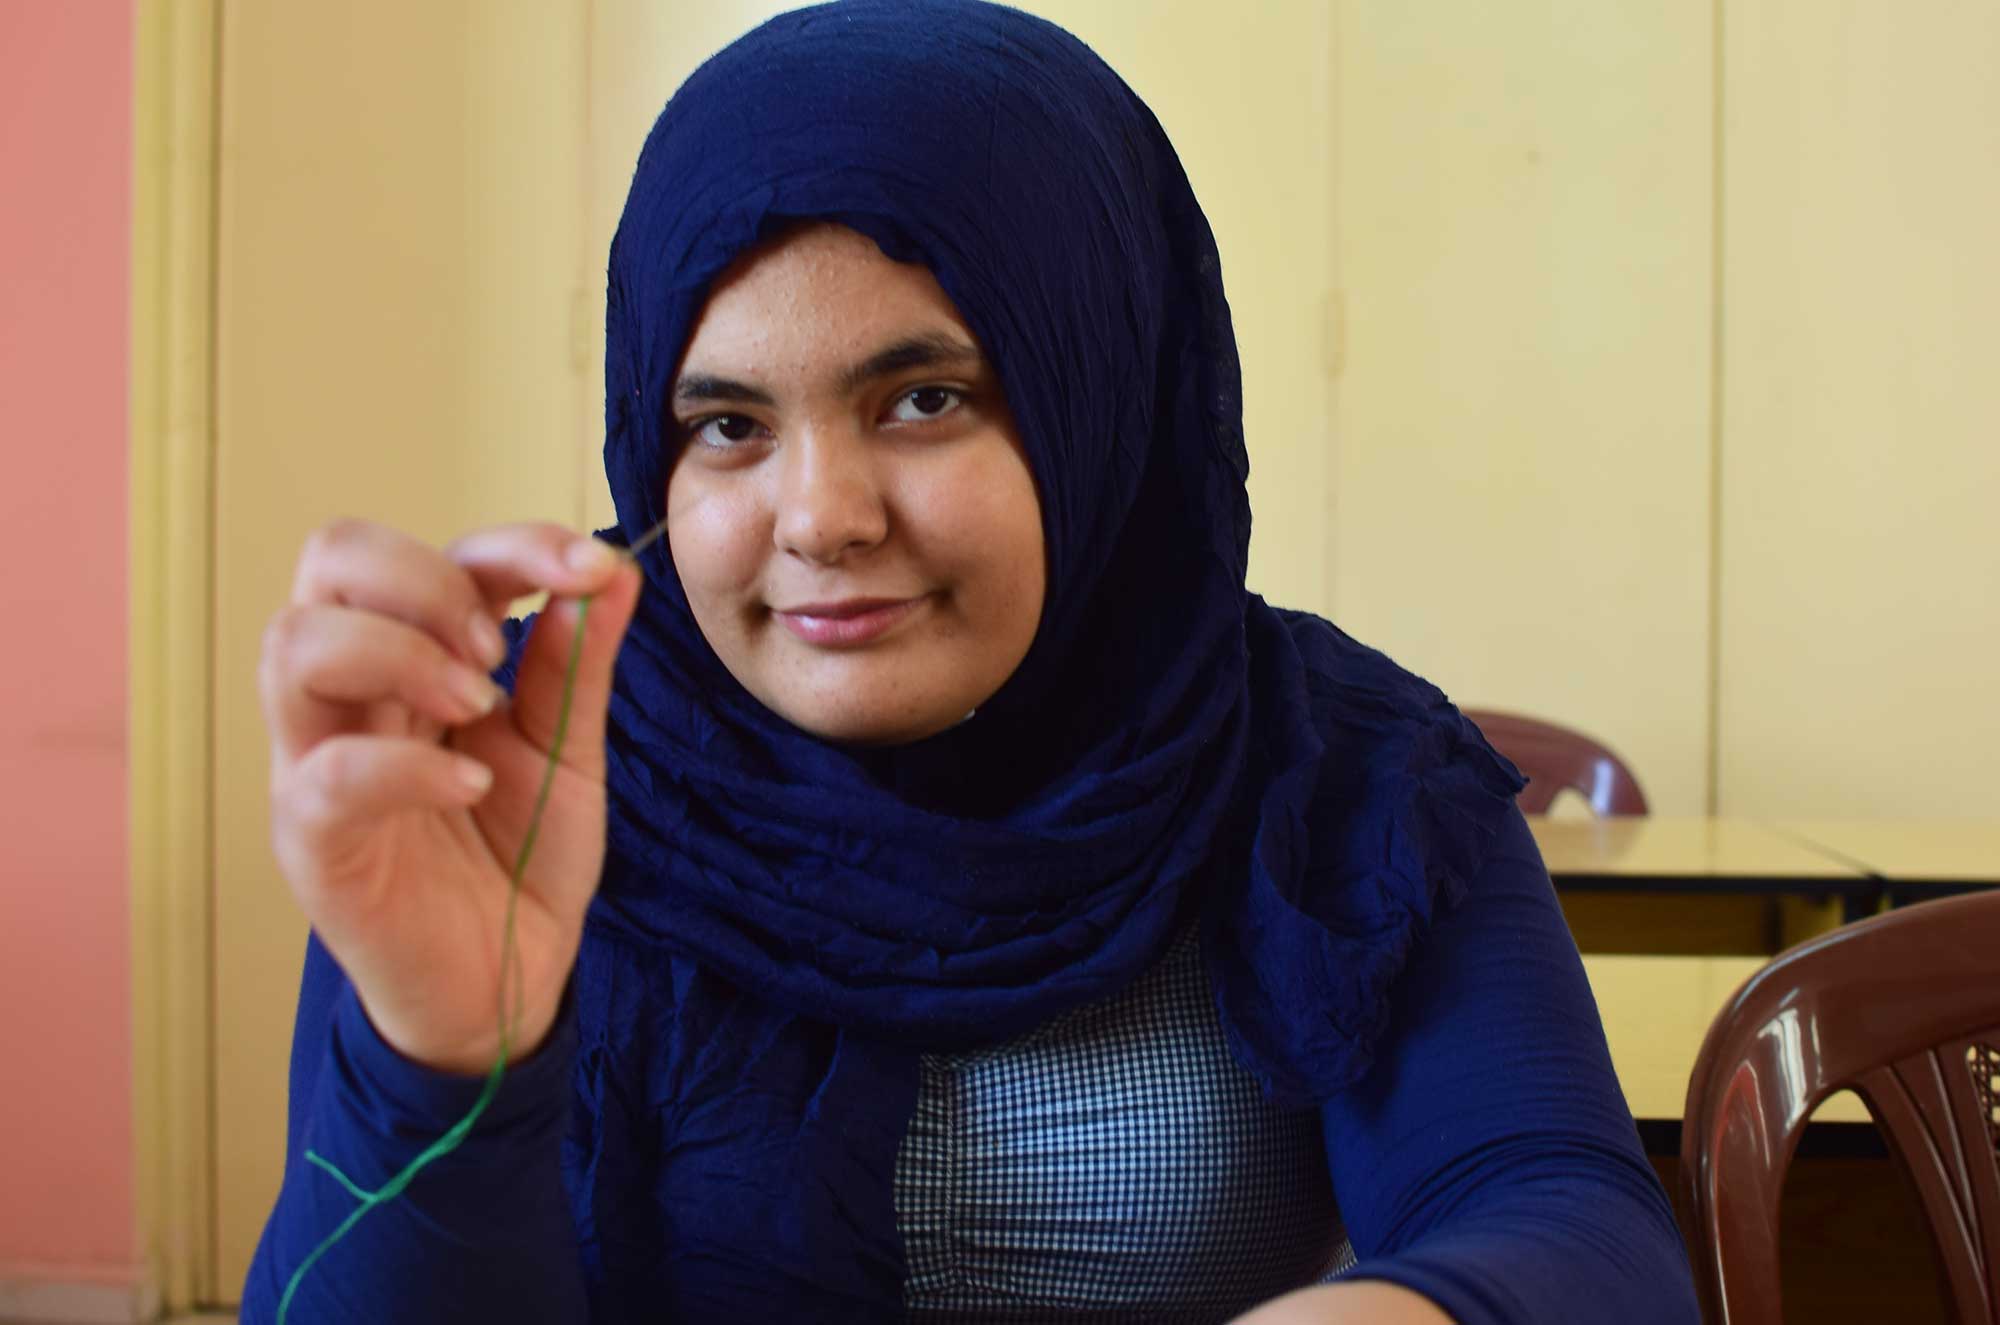 Hiba says embroidery is part of her Palestinian heritage, and she wants to preserve it.